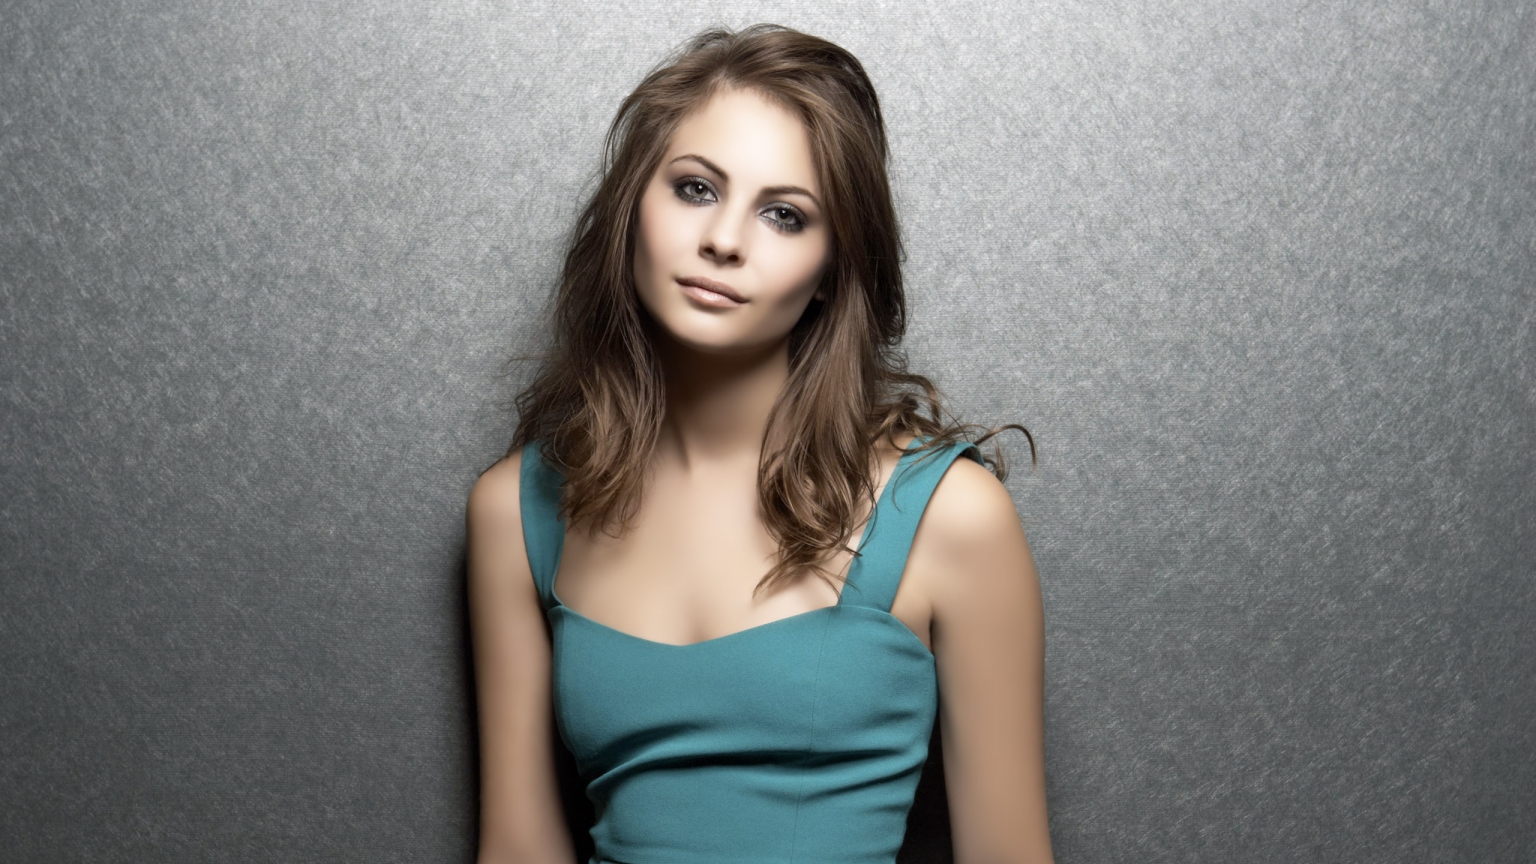 Sexy Willa Holland for 1536 x 864 HDTV resolution